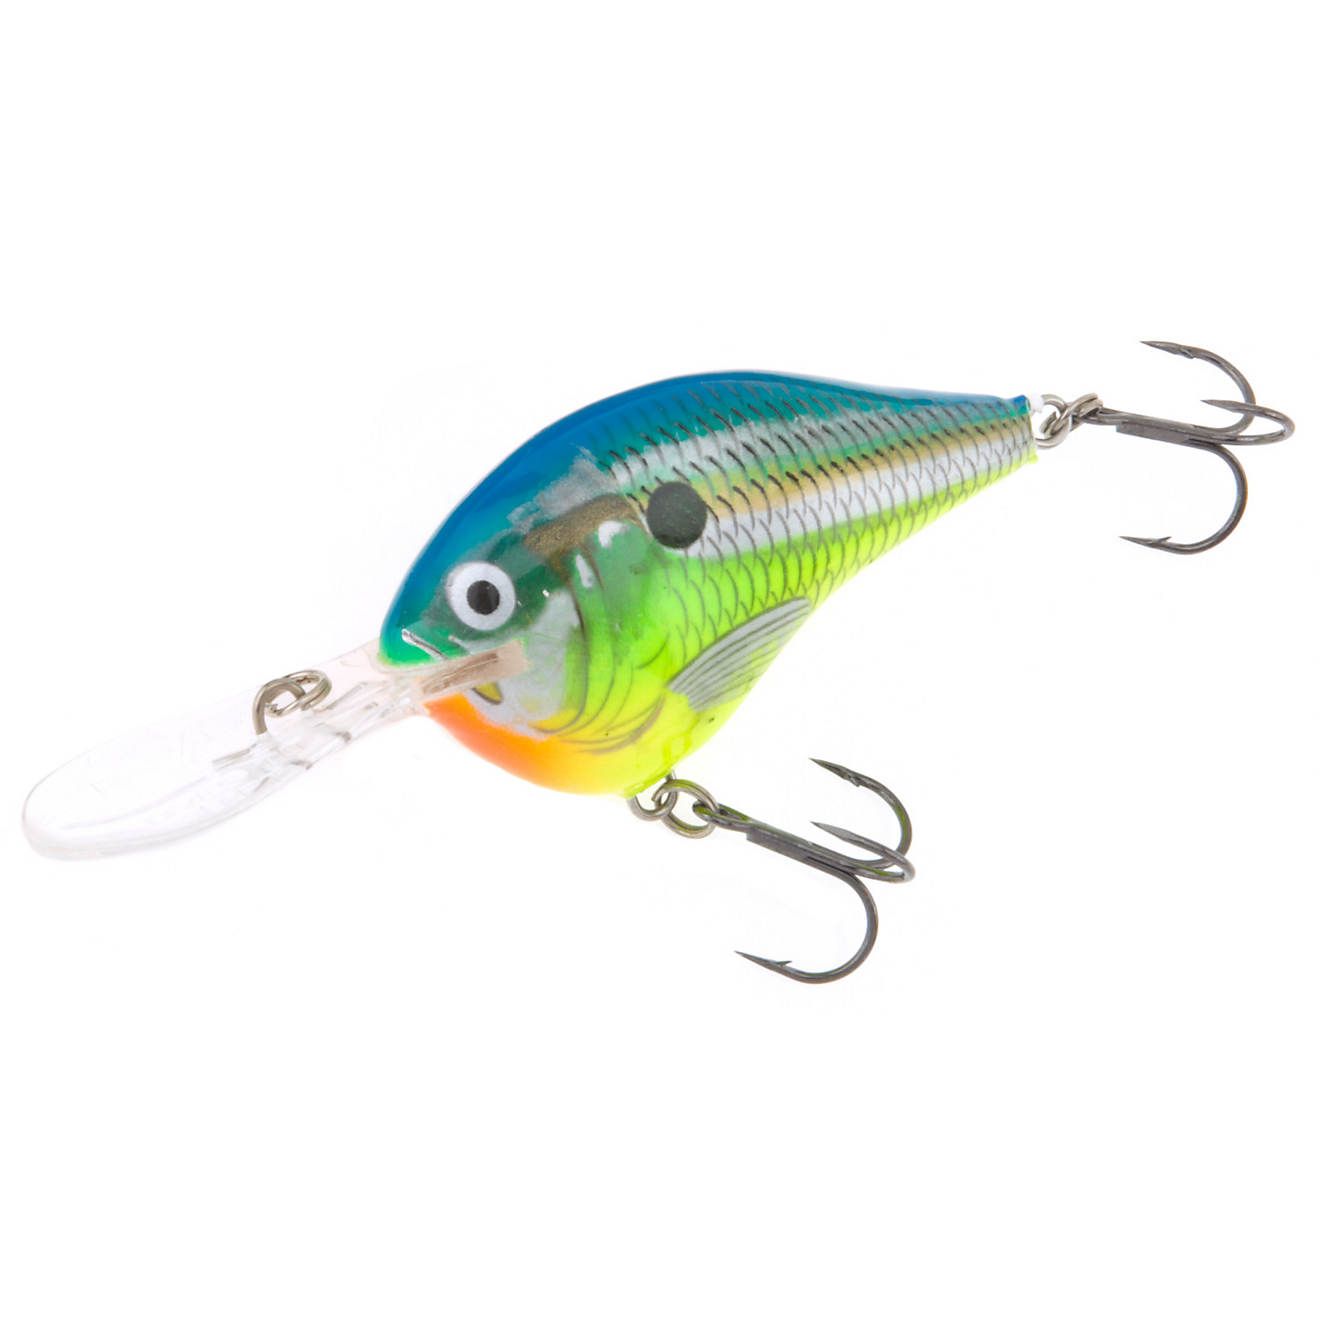 Rapala® DT10 Lure | Academy | Academy Sports + Outdoors